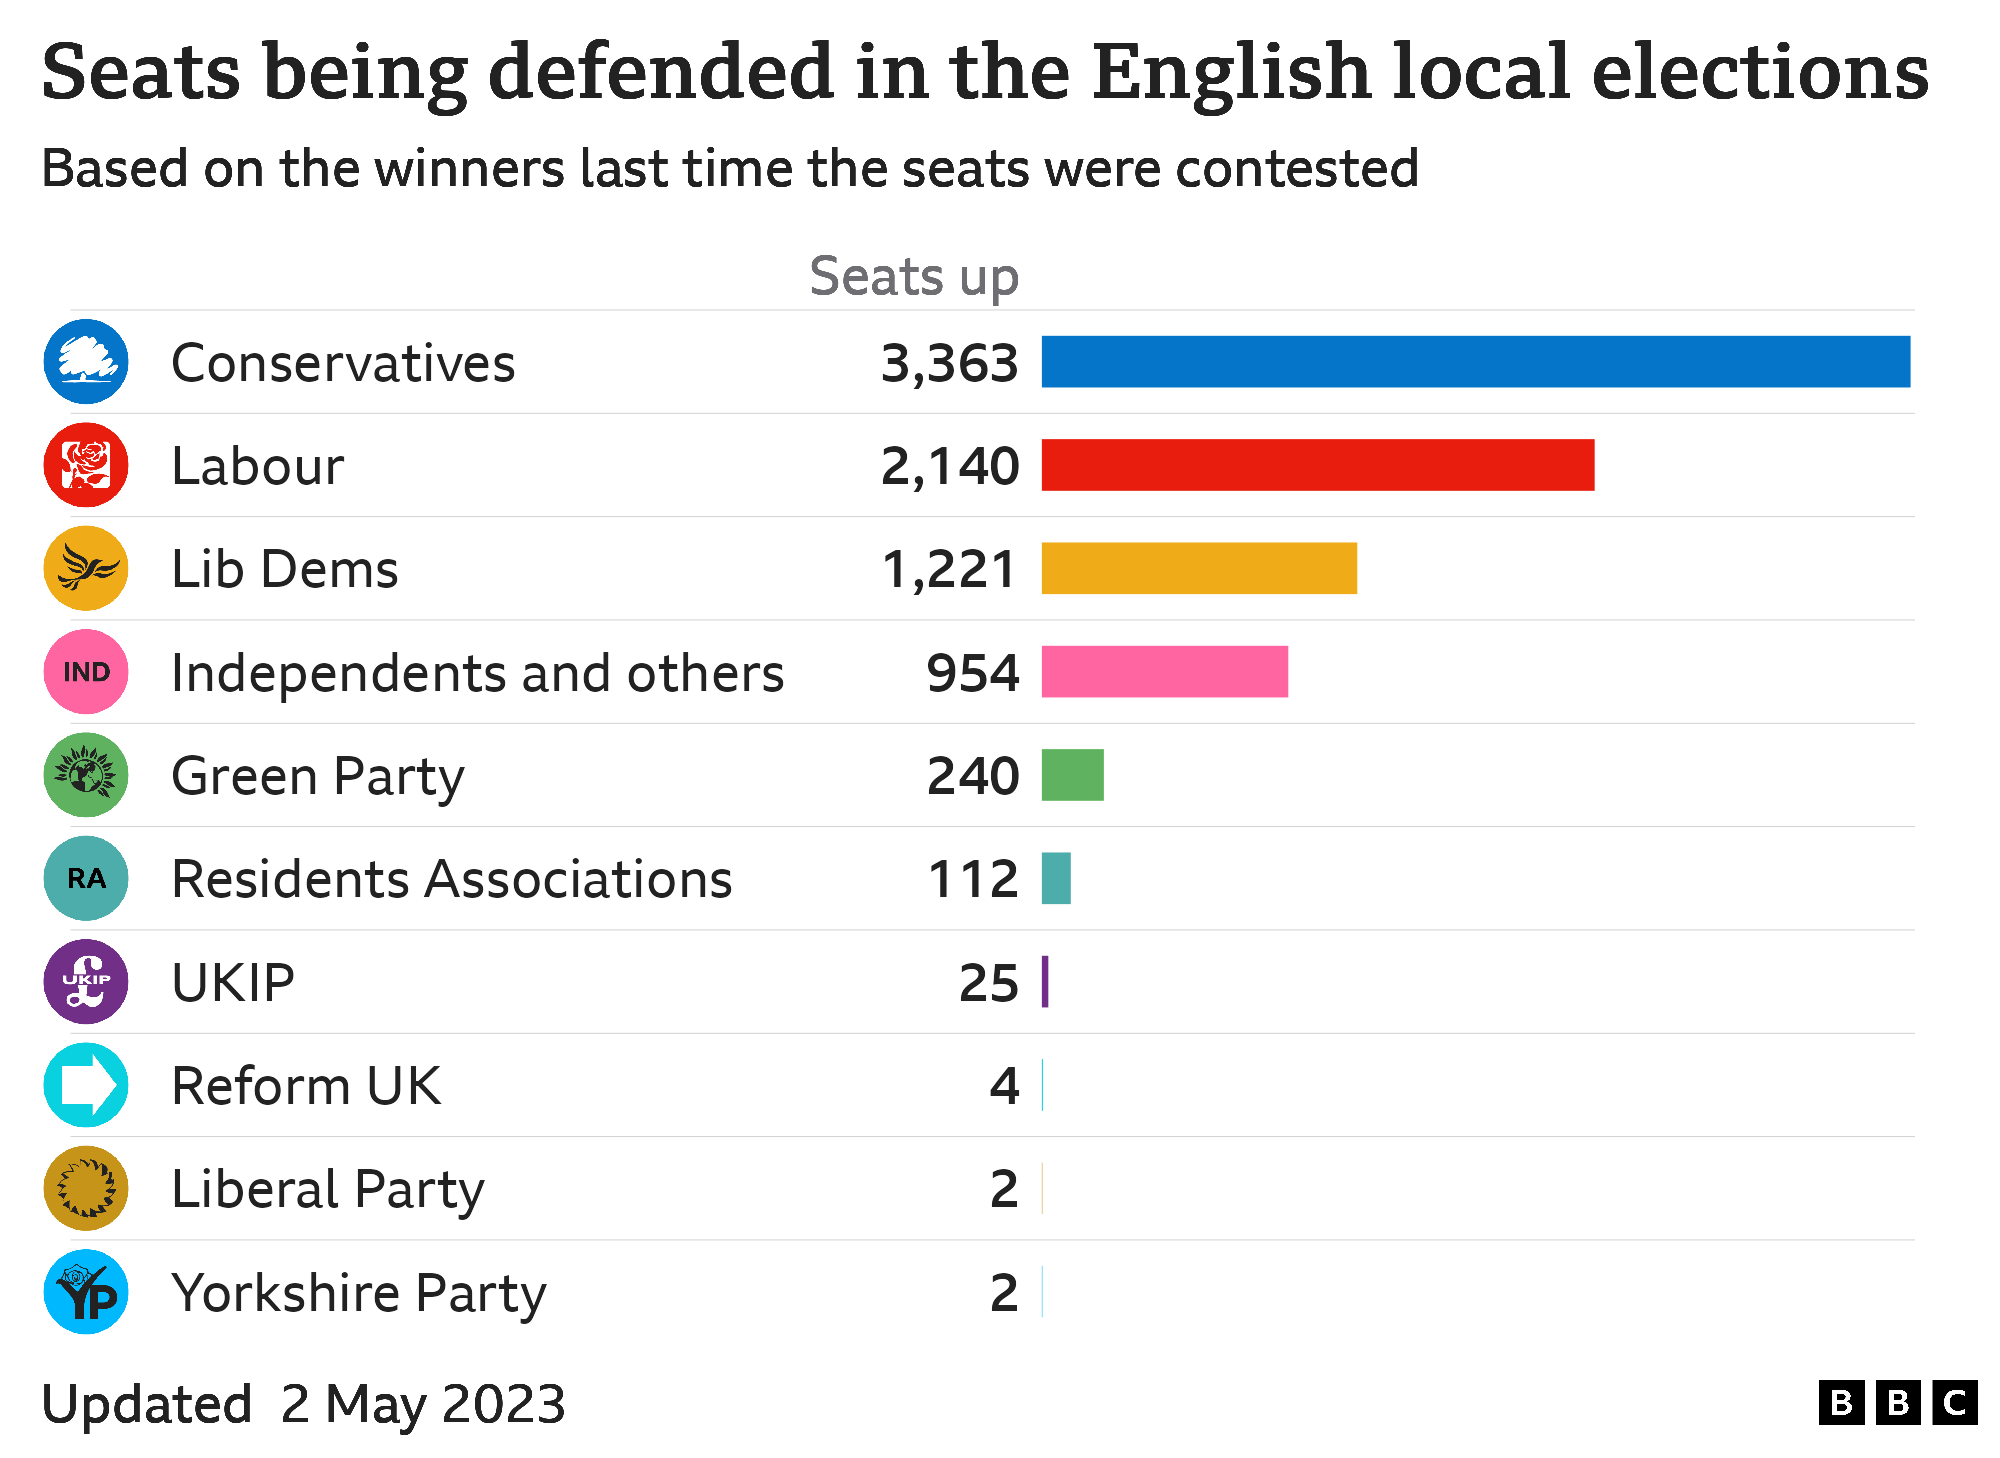 Bar chart showing council seats defended by each party in England, Conservatives 3363, Labour 2140, Lib Dems 1221, Independents and others 954, Green Party 240, Residents Associations 112, UKIP 25, Reform UK 4, Liberal Party 2, Yorkshire Party 2